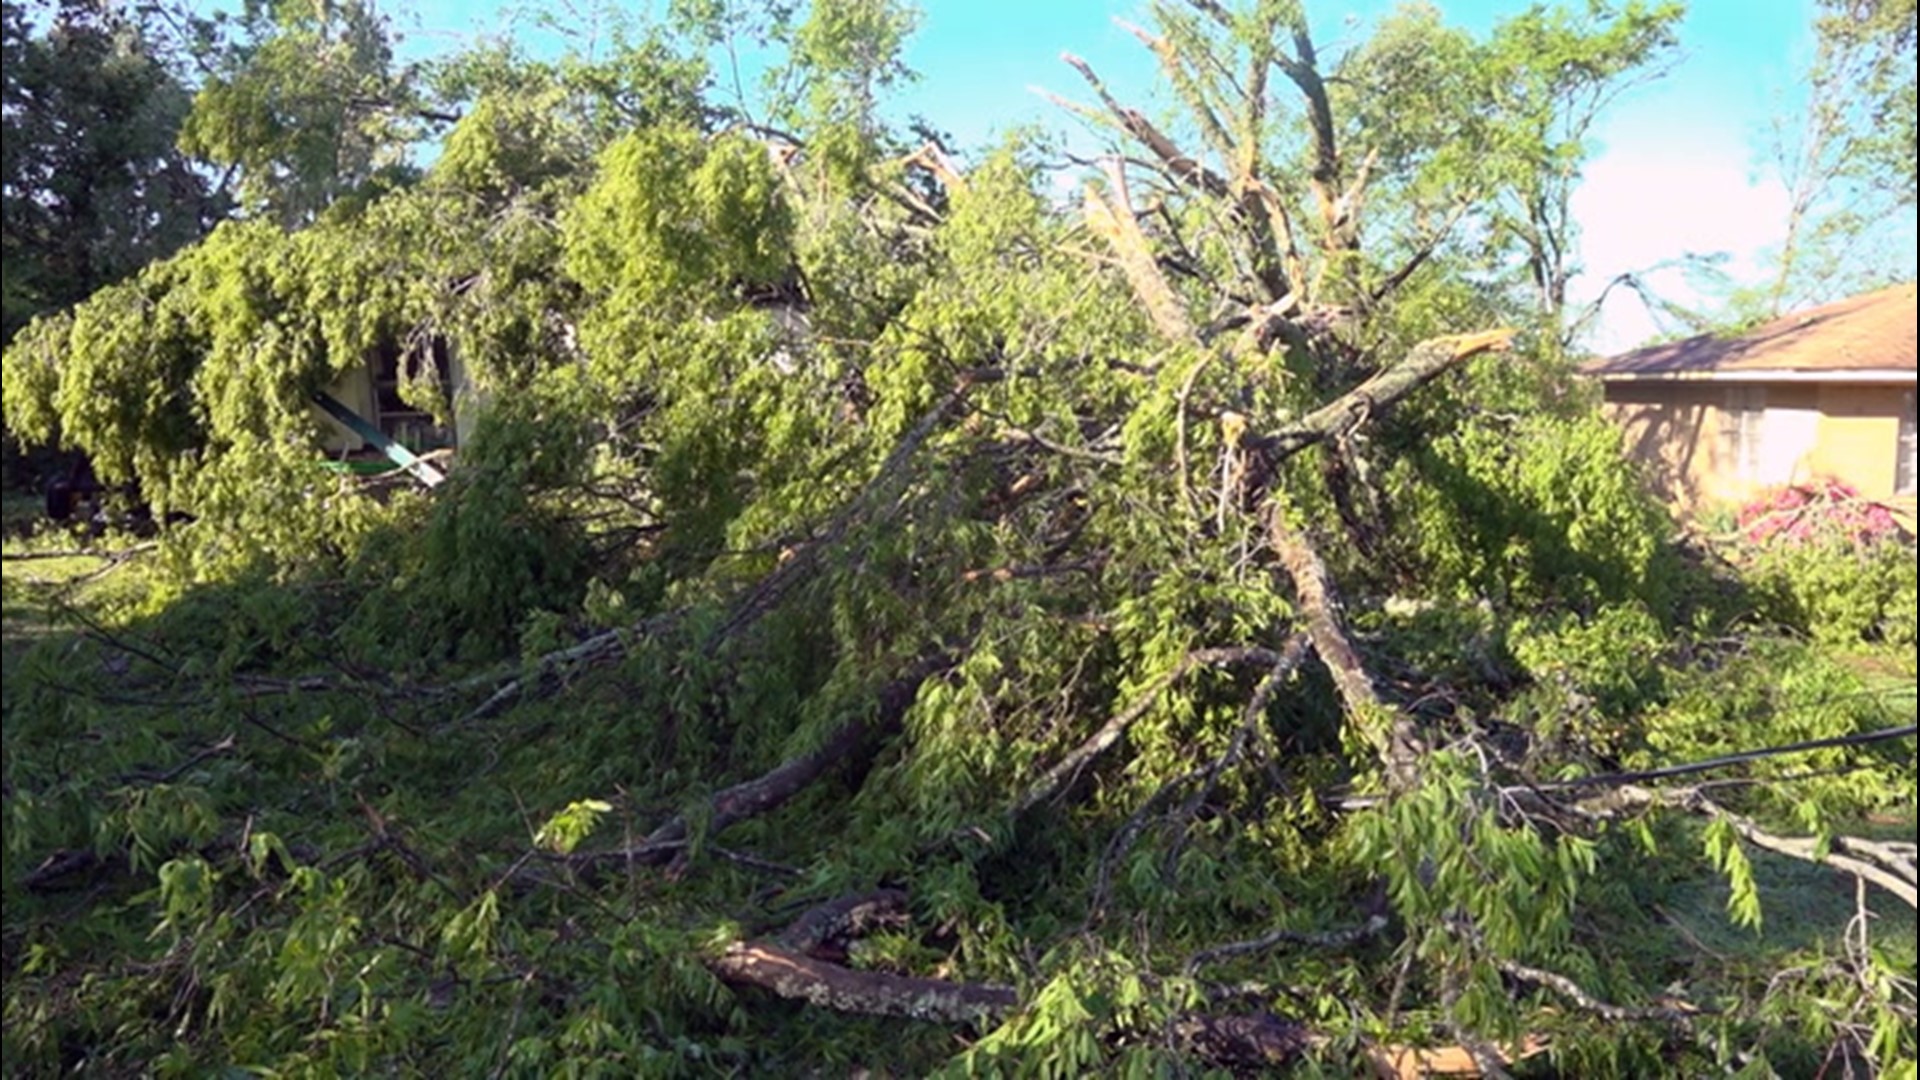 Experts say proper tree pruning can reduce the risk of property damage and injuries during spring severe weather season and the upcoming hurricane season.